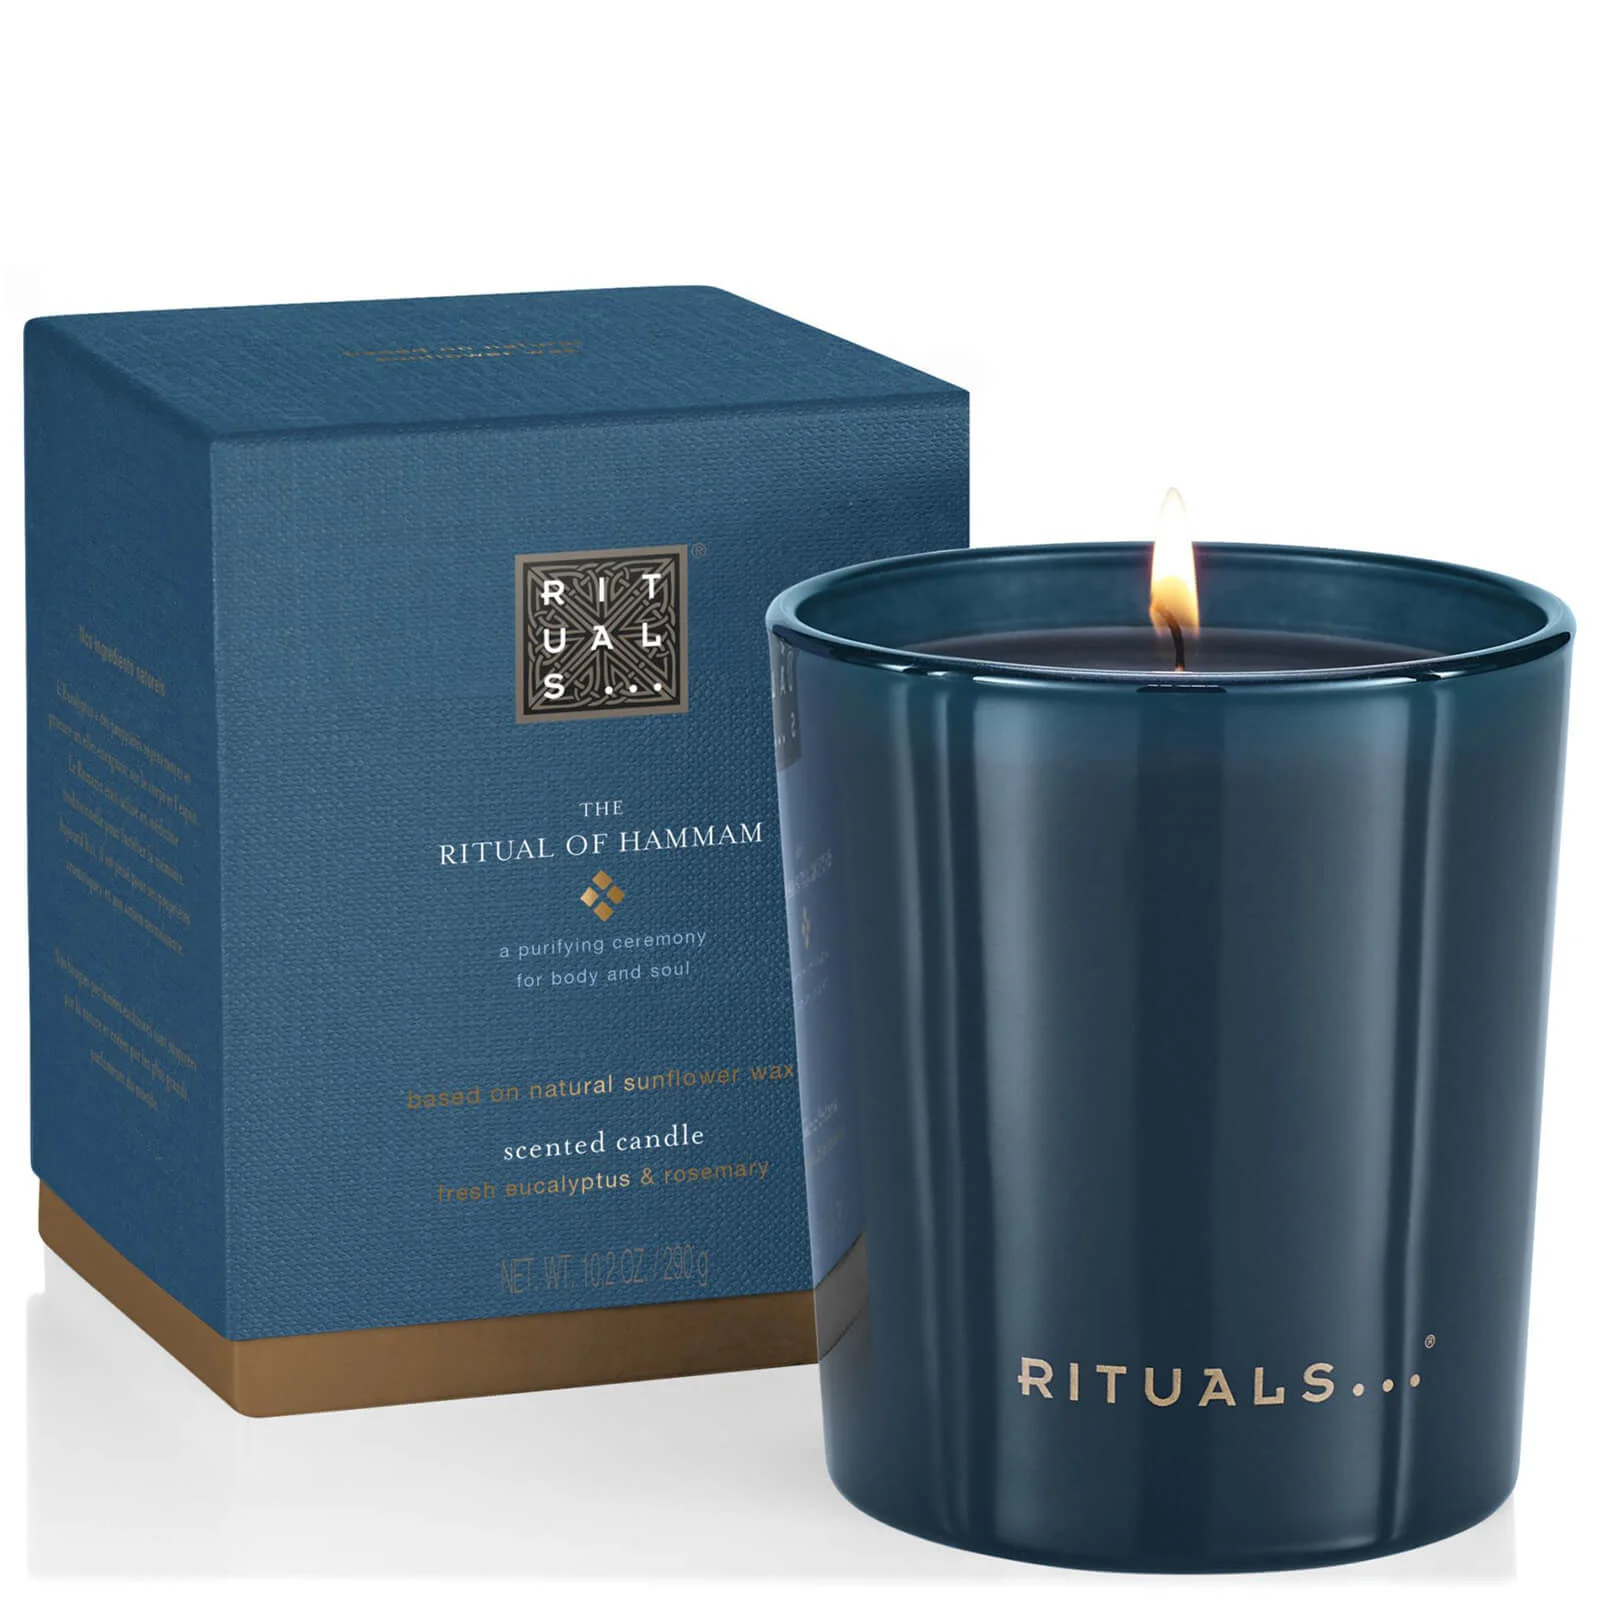 Rituals The Ritual of Hammam Scented Candle 290g Image 1